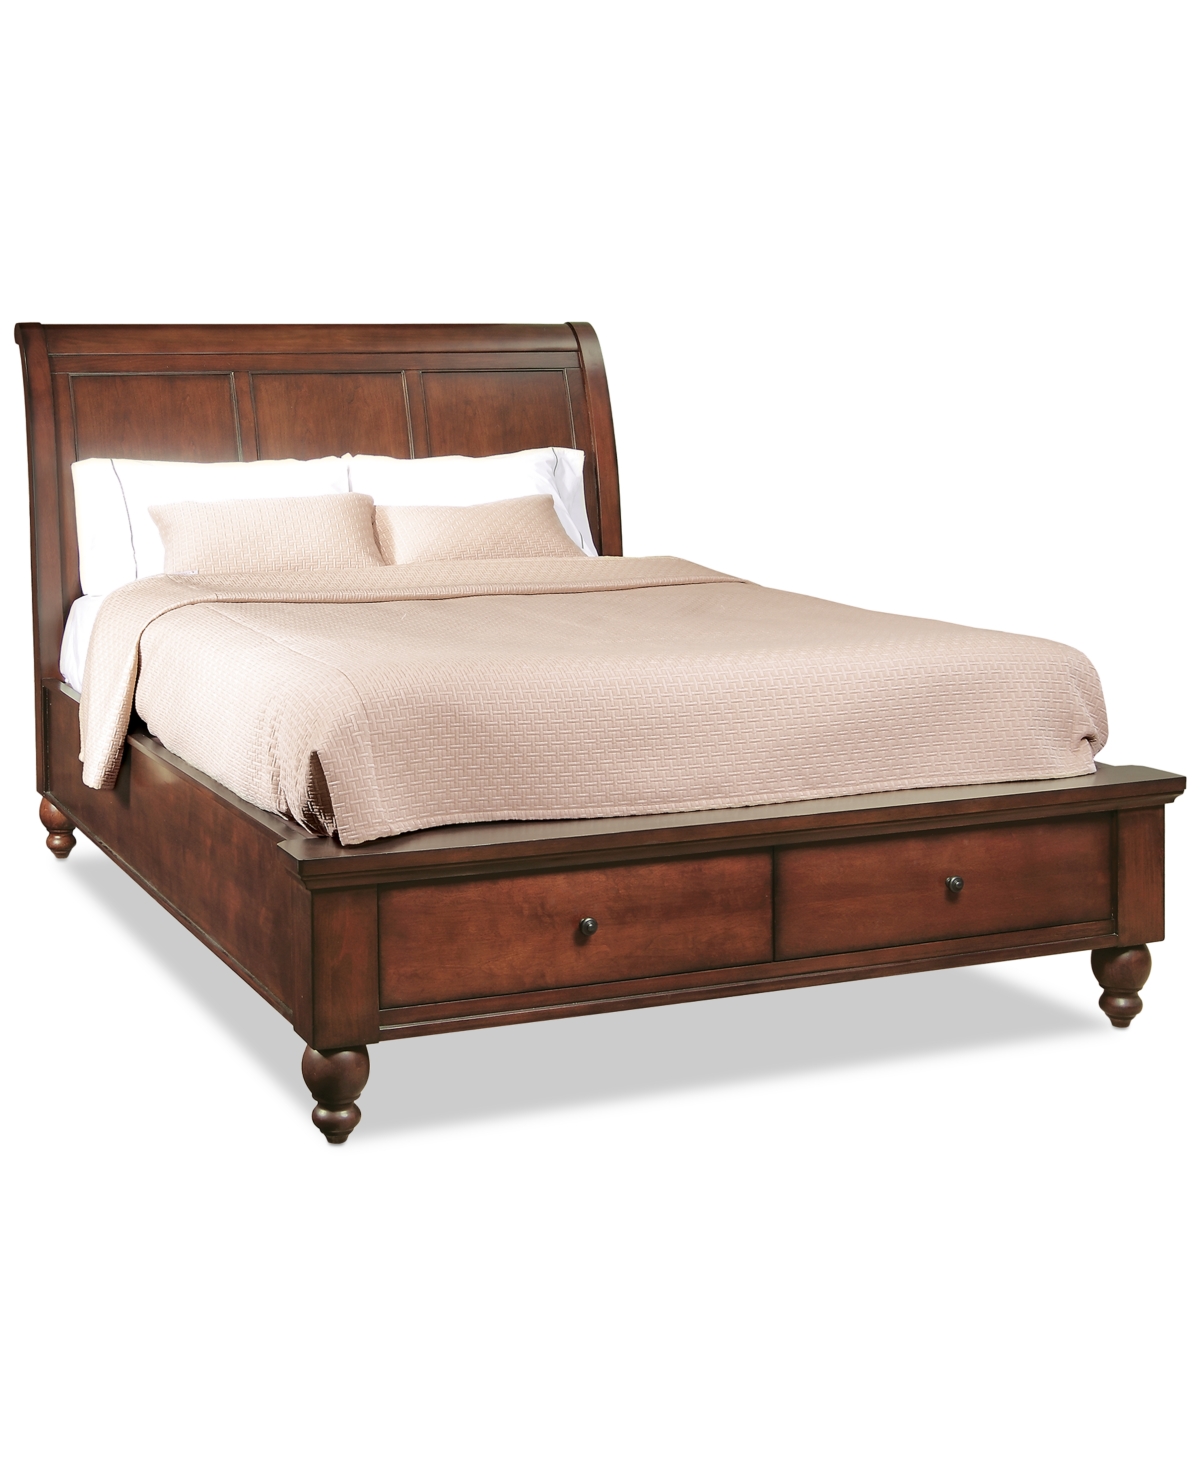 Aspenhome Cambridge King Sleigh Storage Bed In Brown